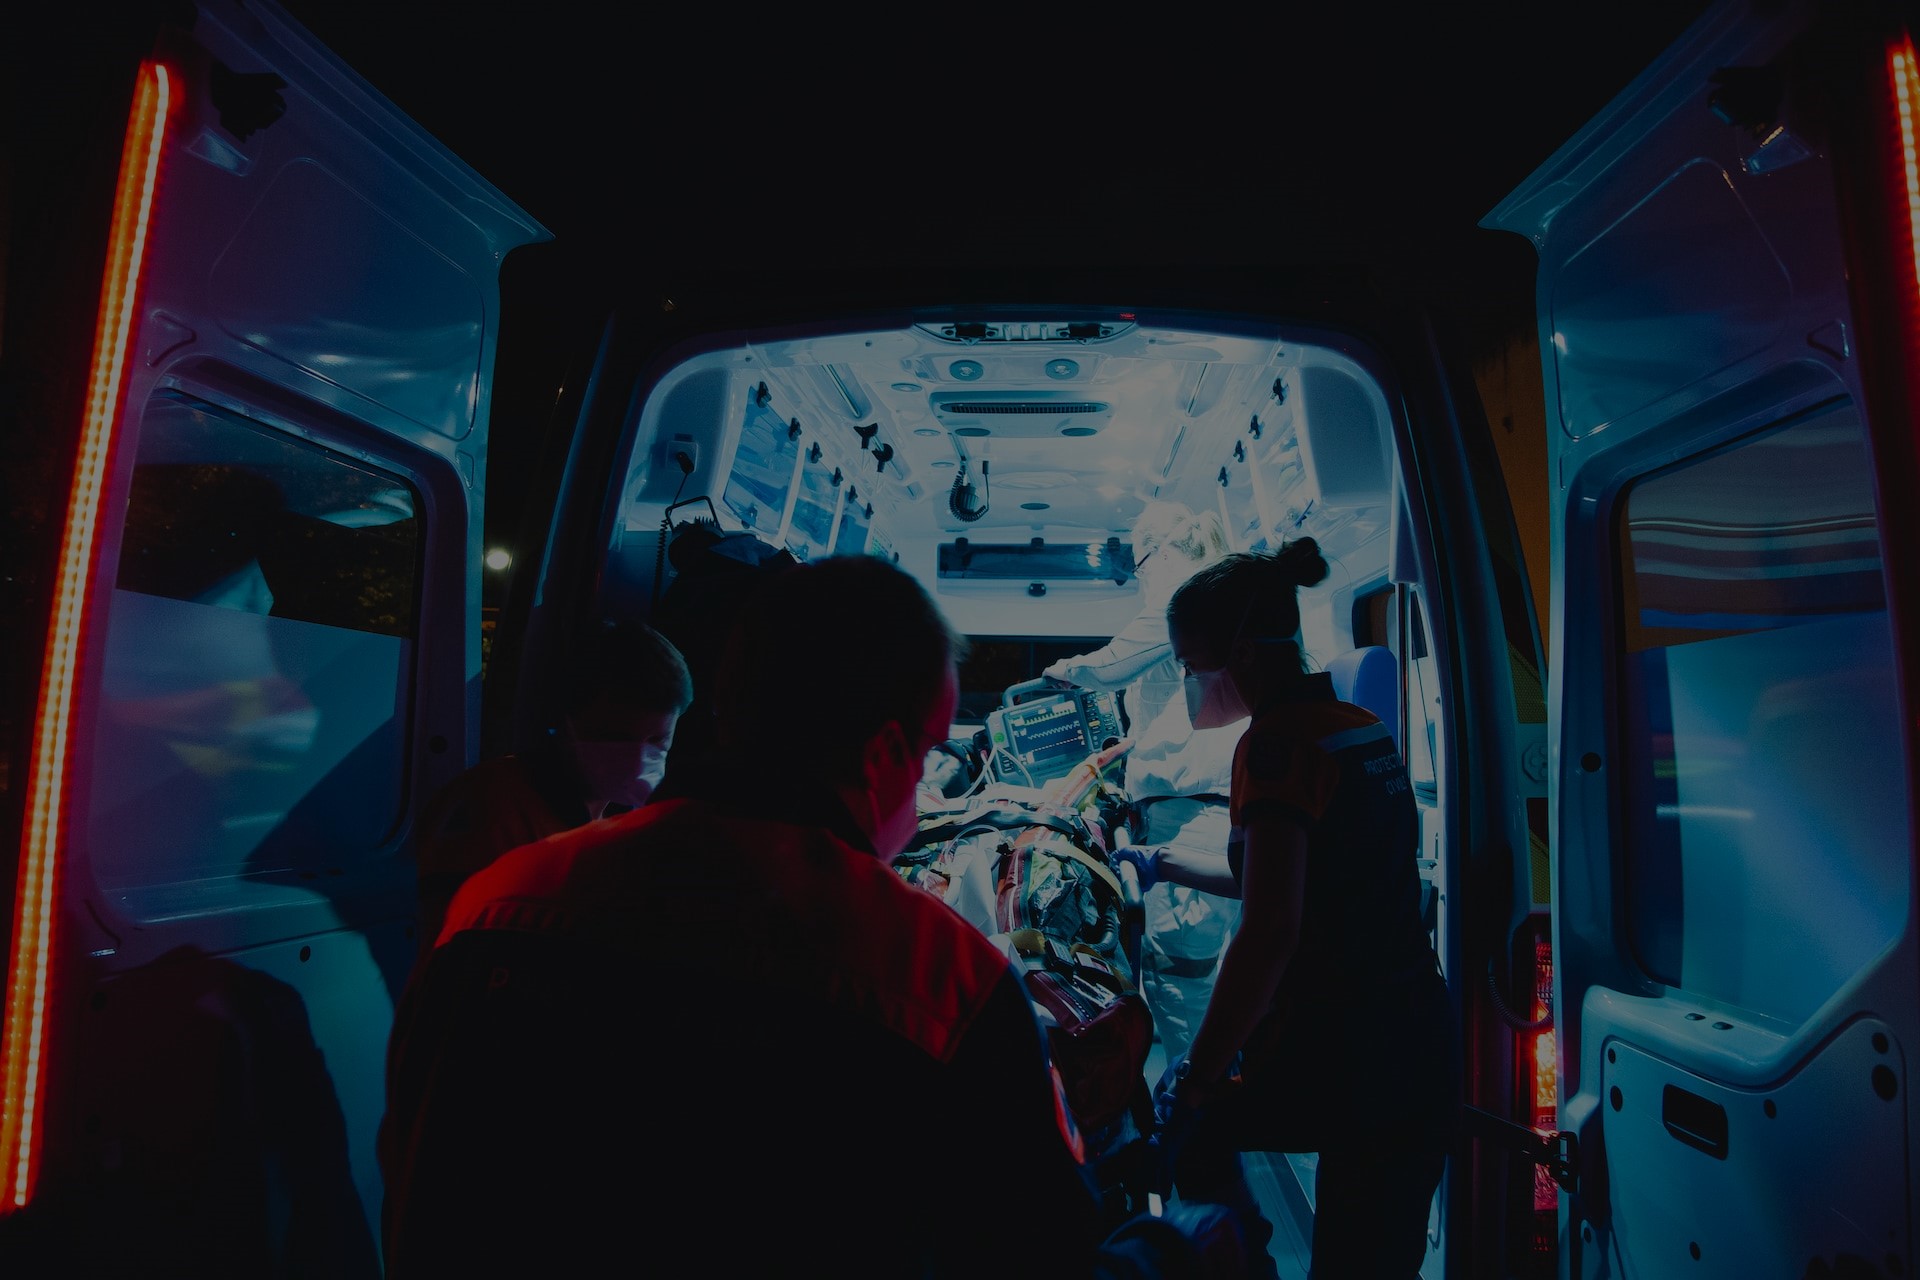 EMS loading a patient into the ambulance